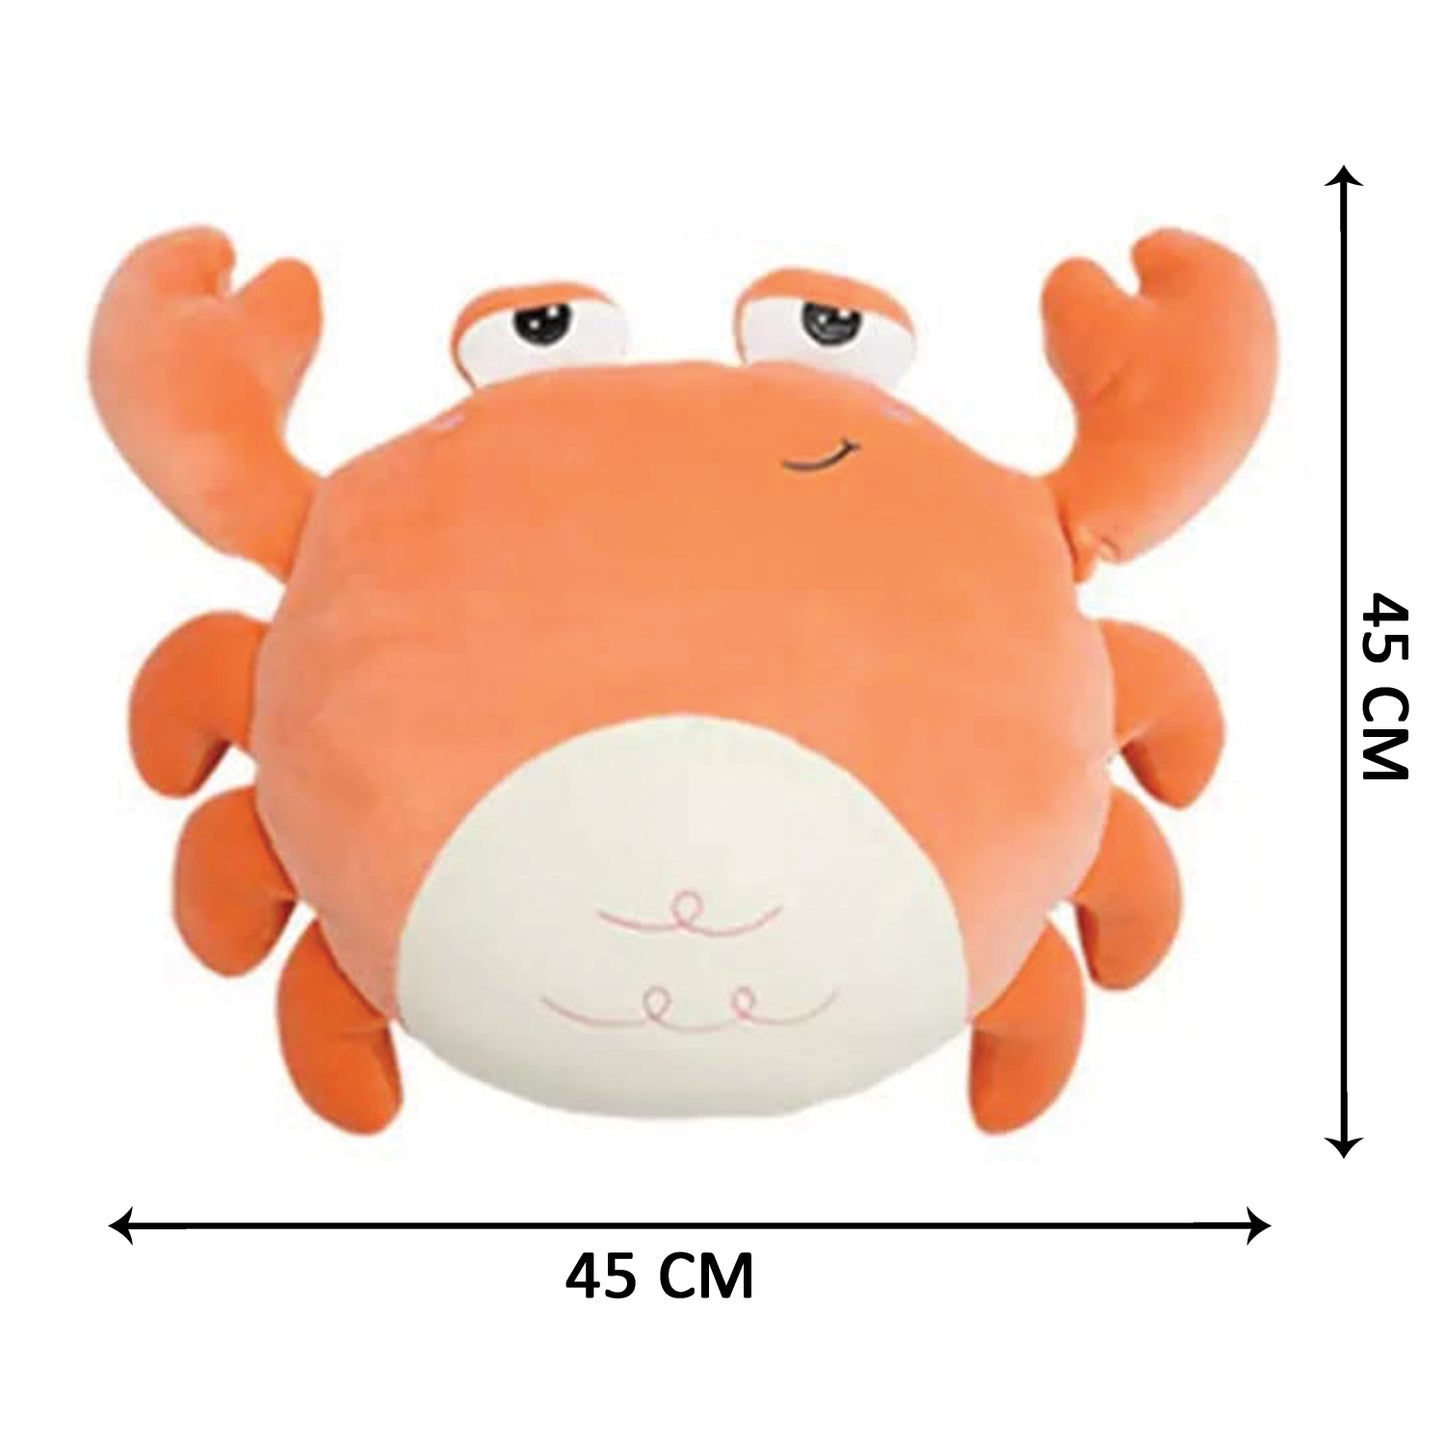 1. A cute stuffed crab toy on a white background.